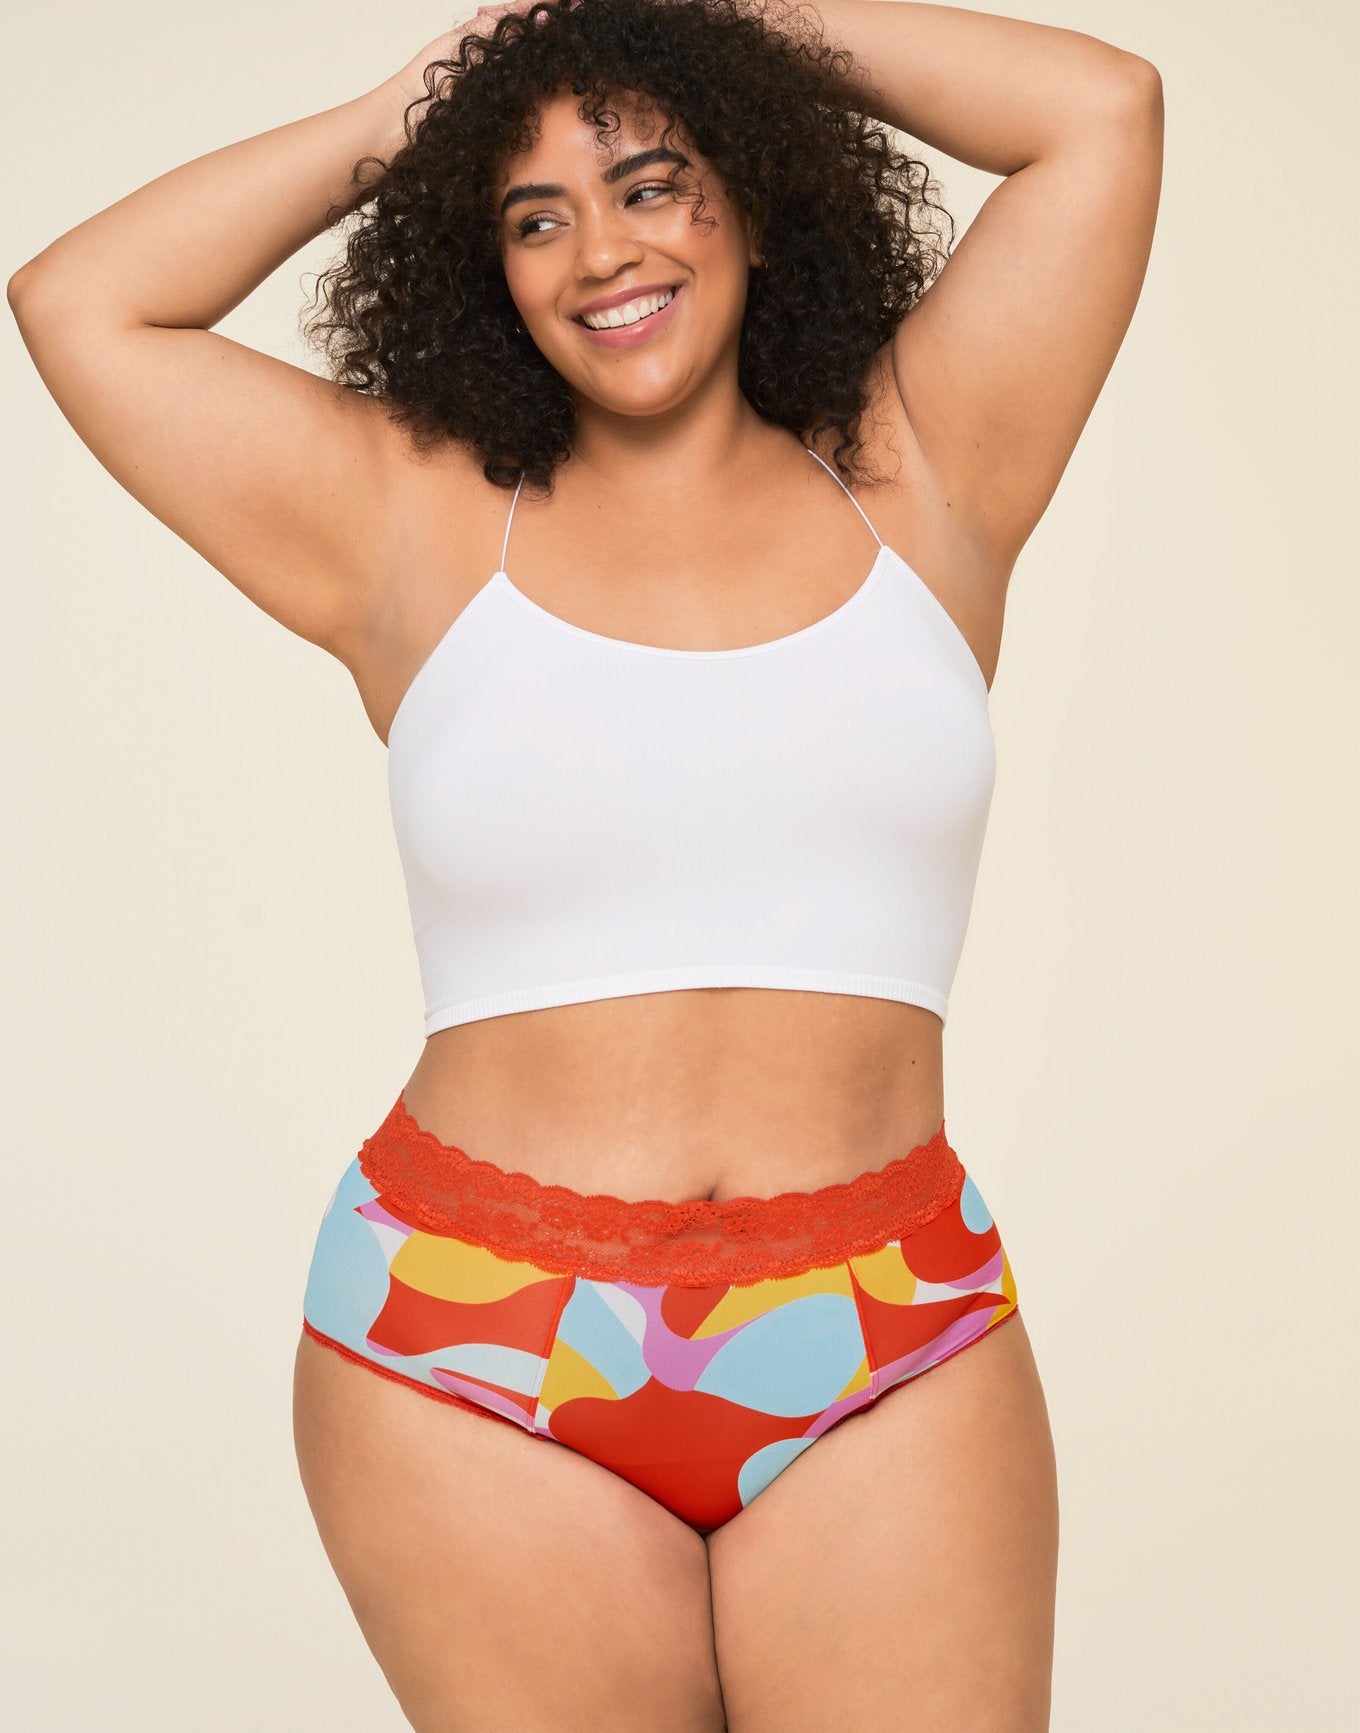 Joyja Amelia period-proof panty in color Abstract Forms C02 and shape high waisted